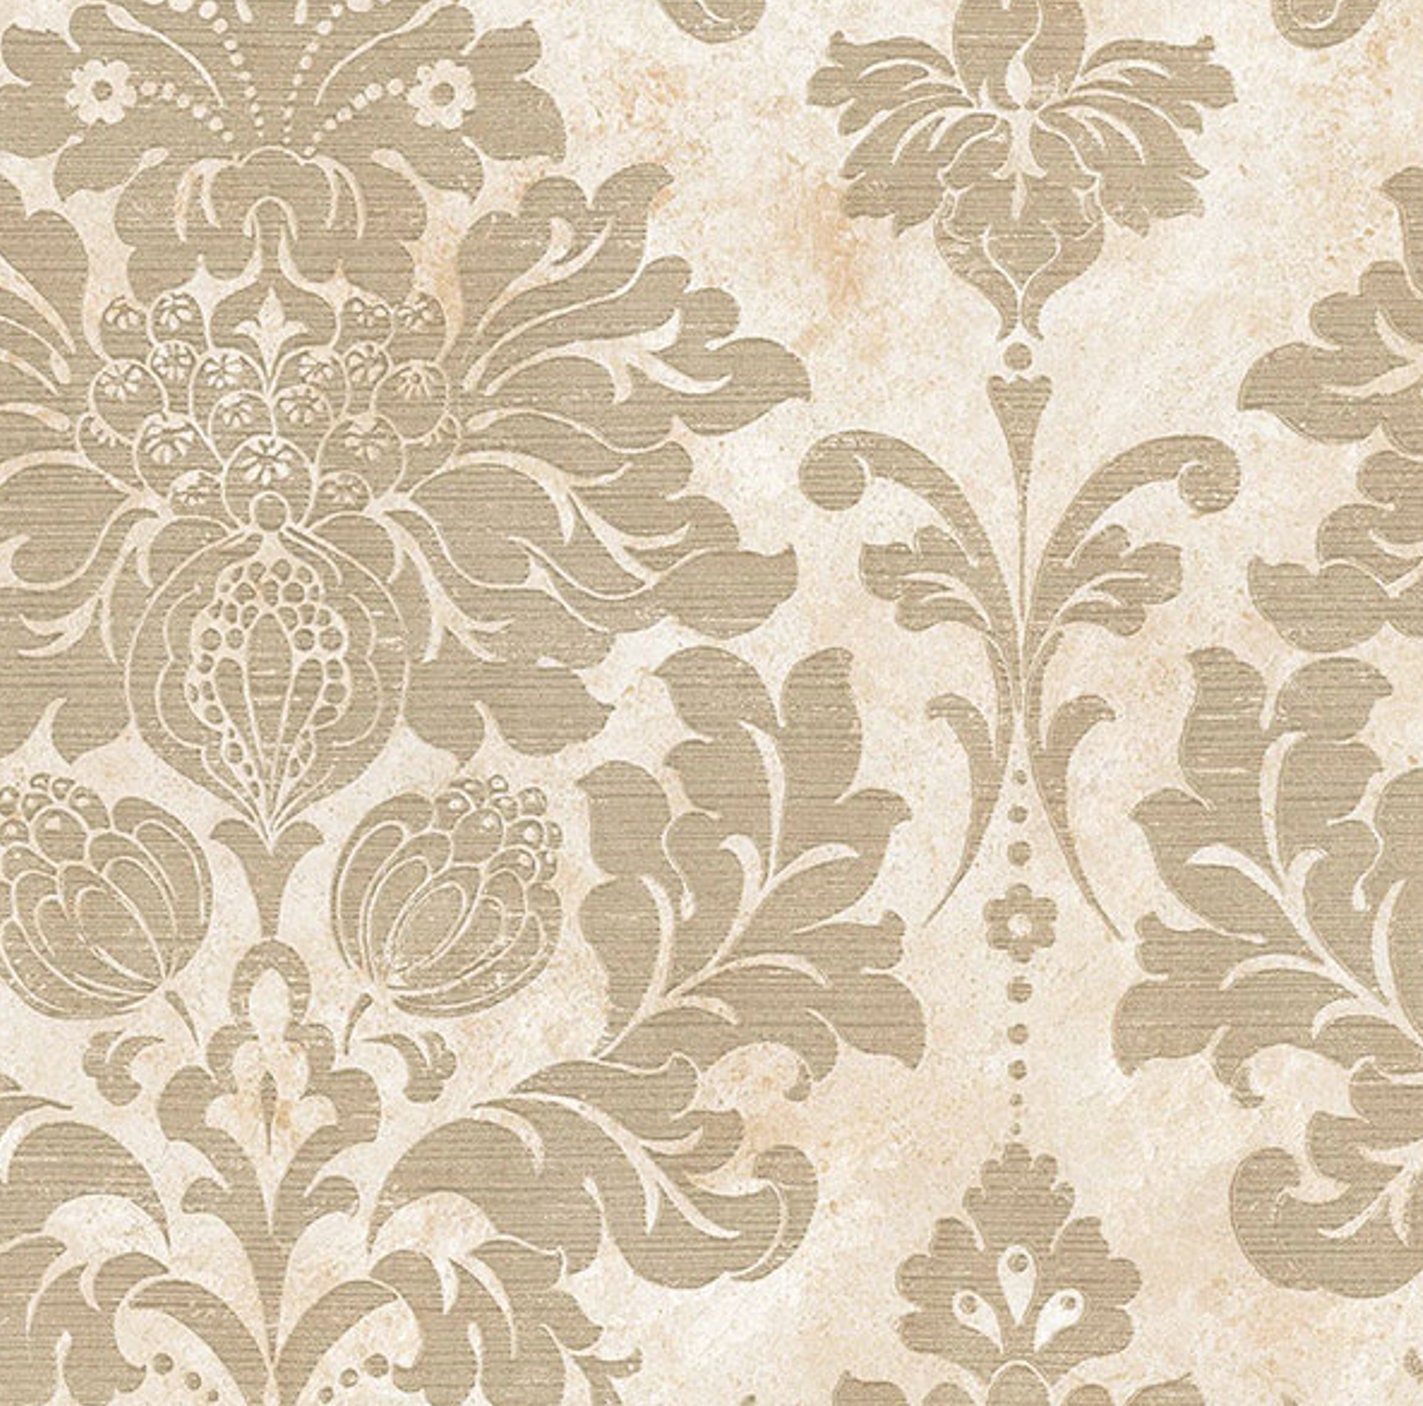 Regal Medallion Damask 12x9 Sample F497-32808so Old French Country Décor Paintable Textured Wallpaper Vintage Chic Victorian Damascene